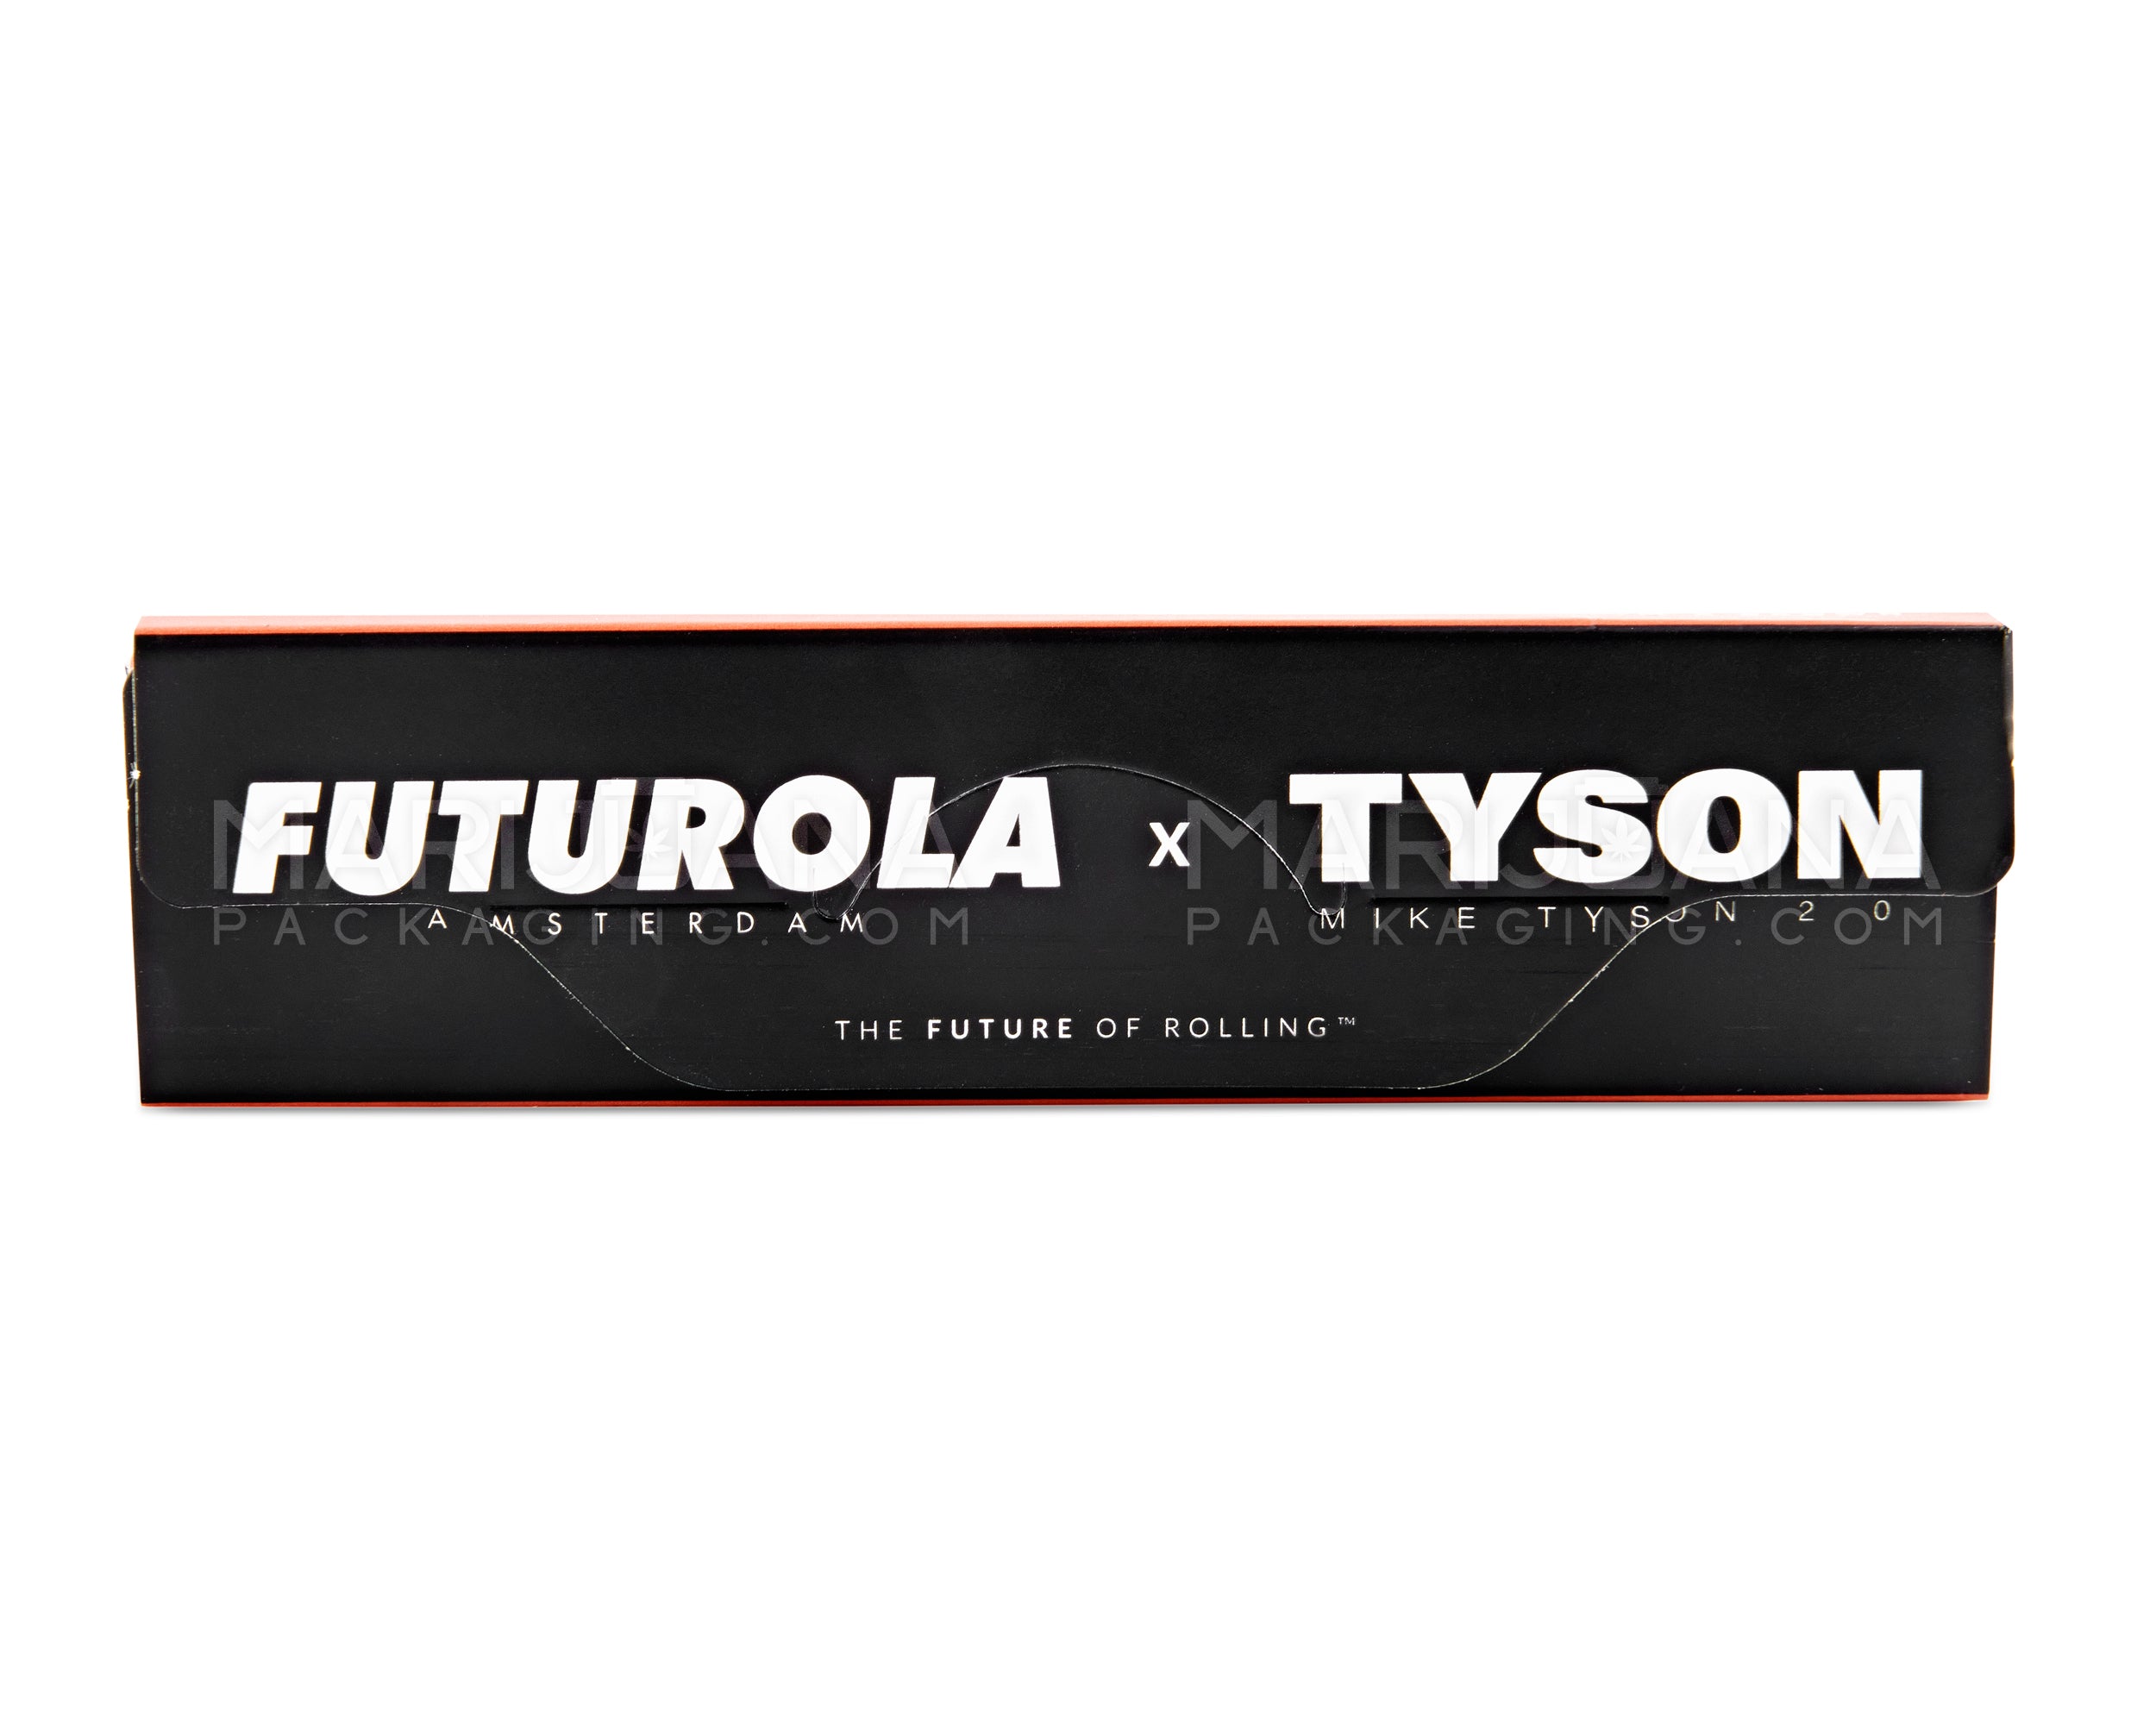 FUTUROLA | 'Retail Display' Tyson Ranch 2.0 King Size Slim Rolling Papers + Filter Tips | 109mm - Dutch Brown - 24 Count